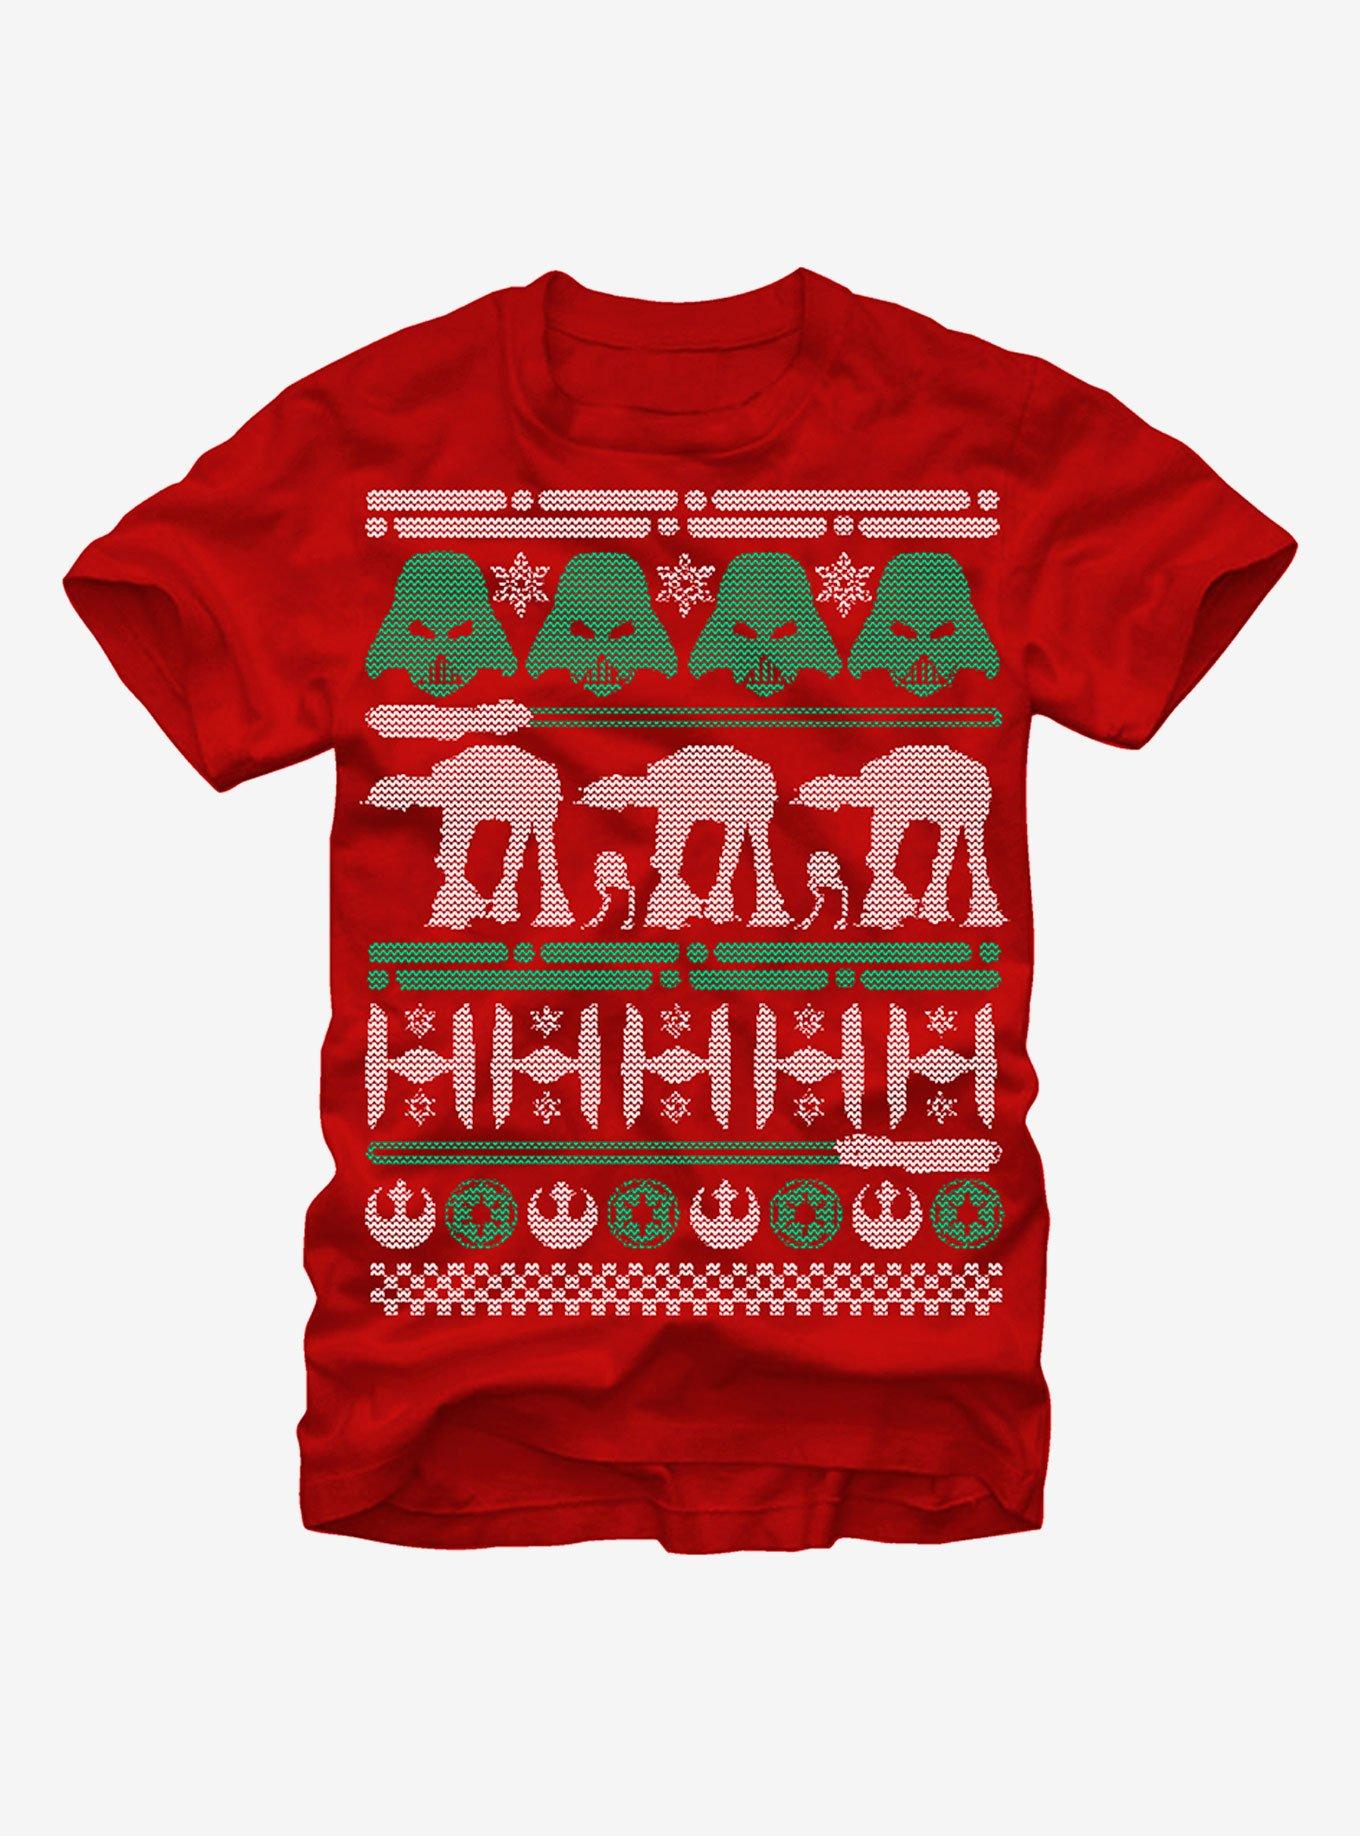 Star Wars Ugly Christmas Sweater T-Shirt, RED, hi-res